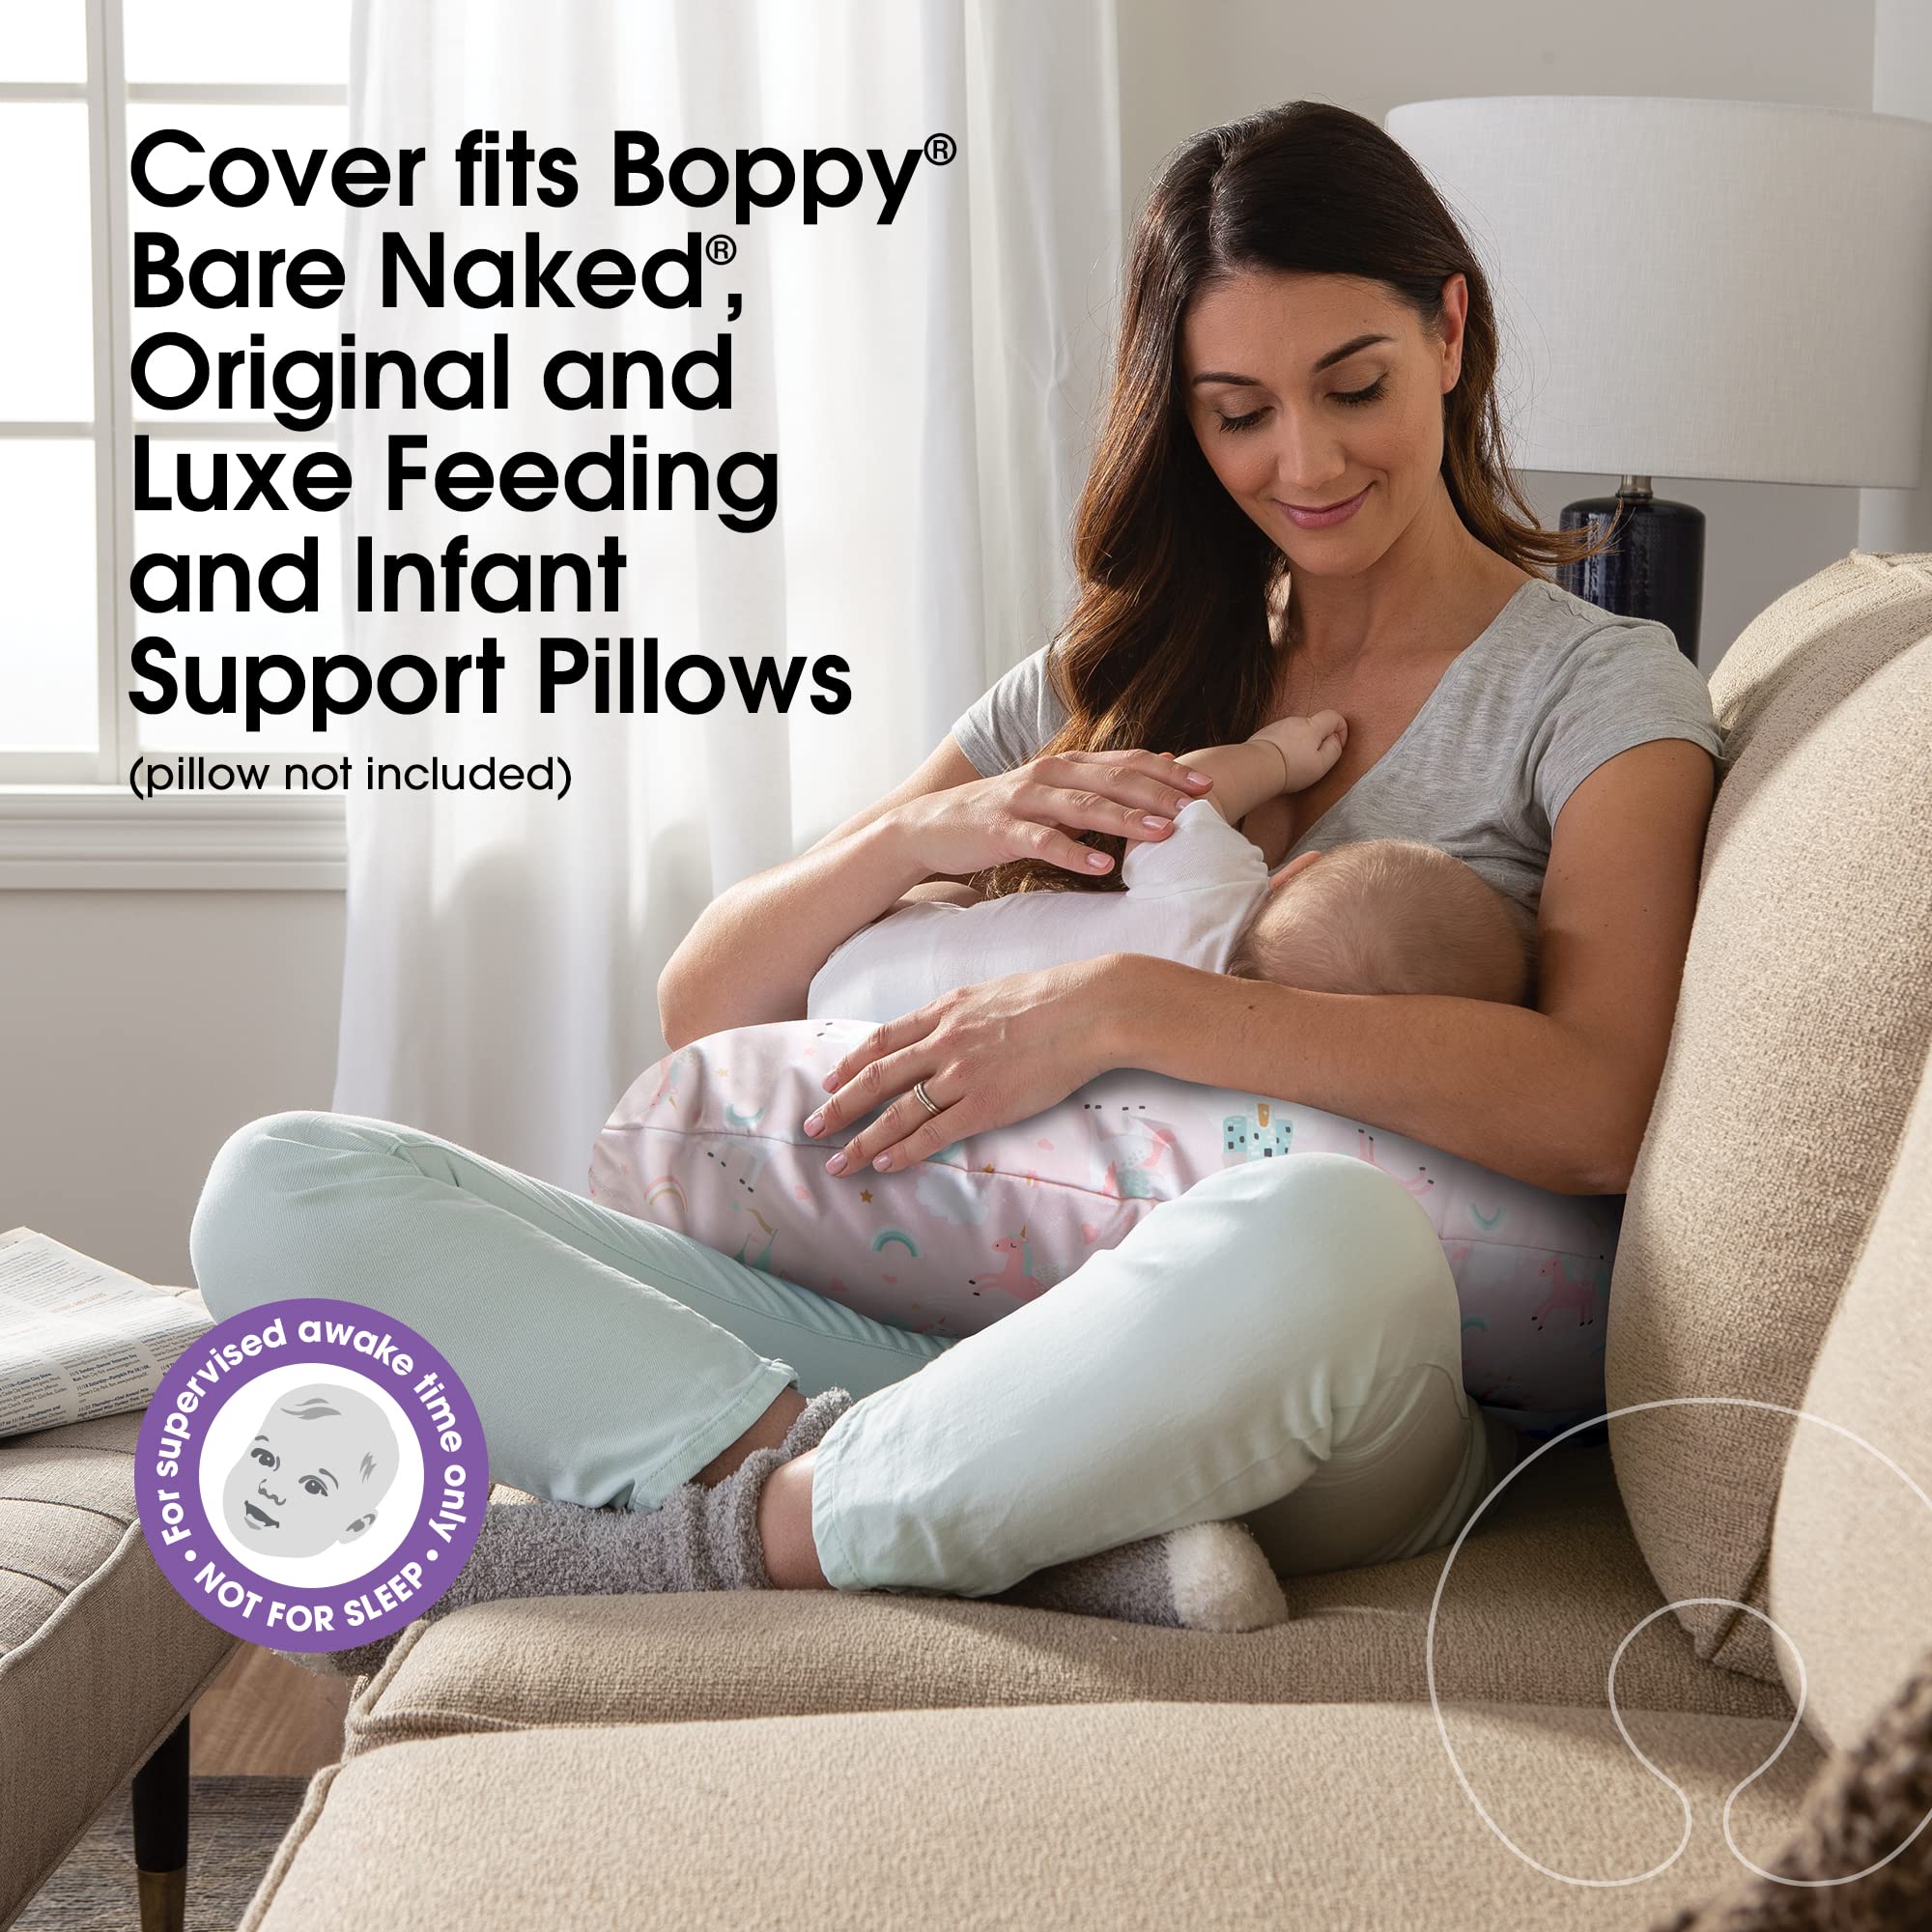 Boppy Nursing Pillow Cover—Original Pink Unicorns and Castles Cotton Blend Fabric Fits Bare Naked, Original and Luxe Breastfeeding Pillow Awake Time Only